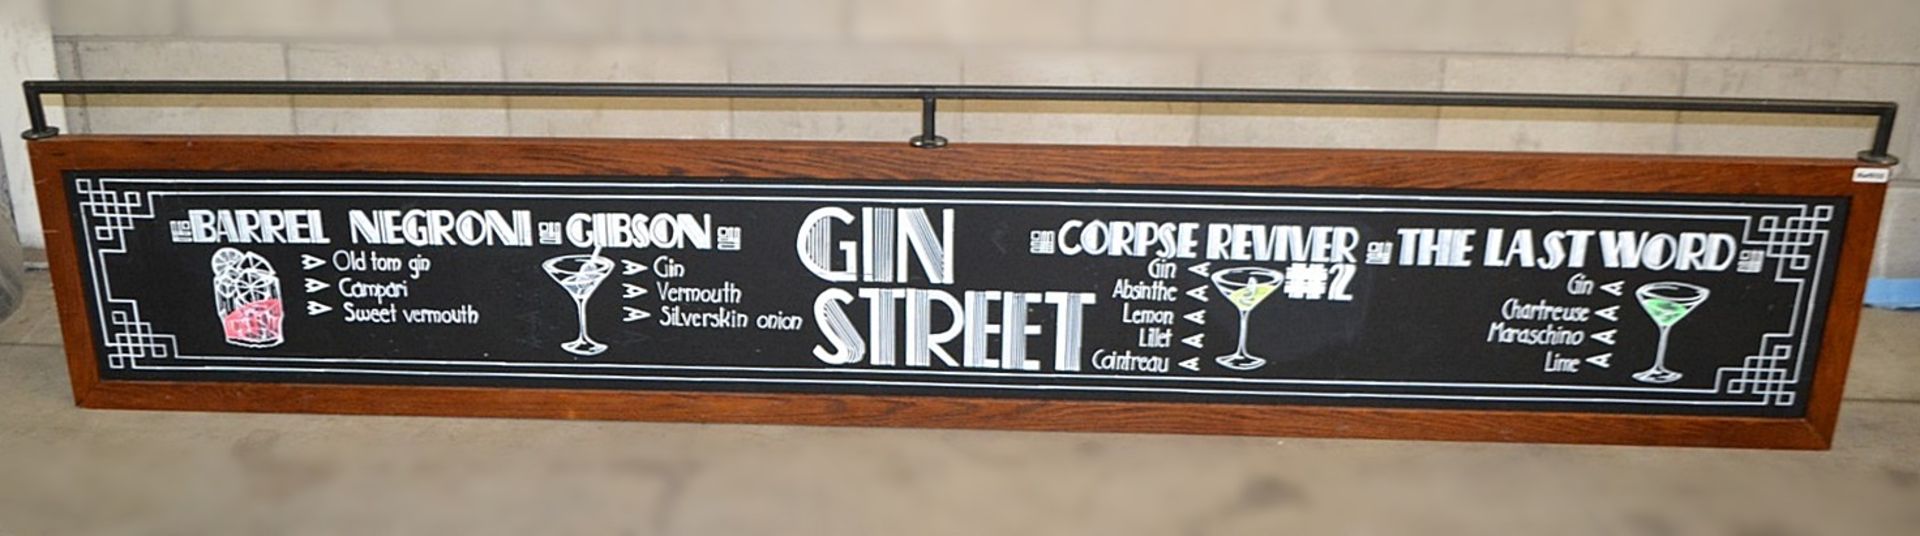 1 x 2.8 Metre Long Double-sided Chalkboard Signage - Dimensions: W285 x H57 x D3.5